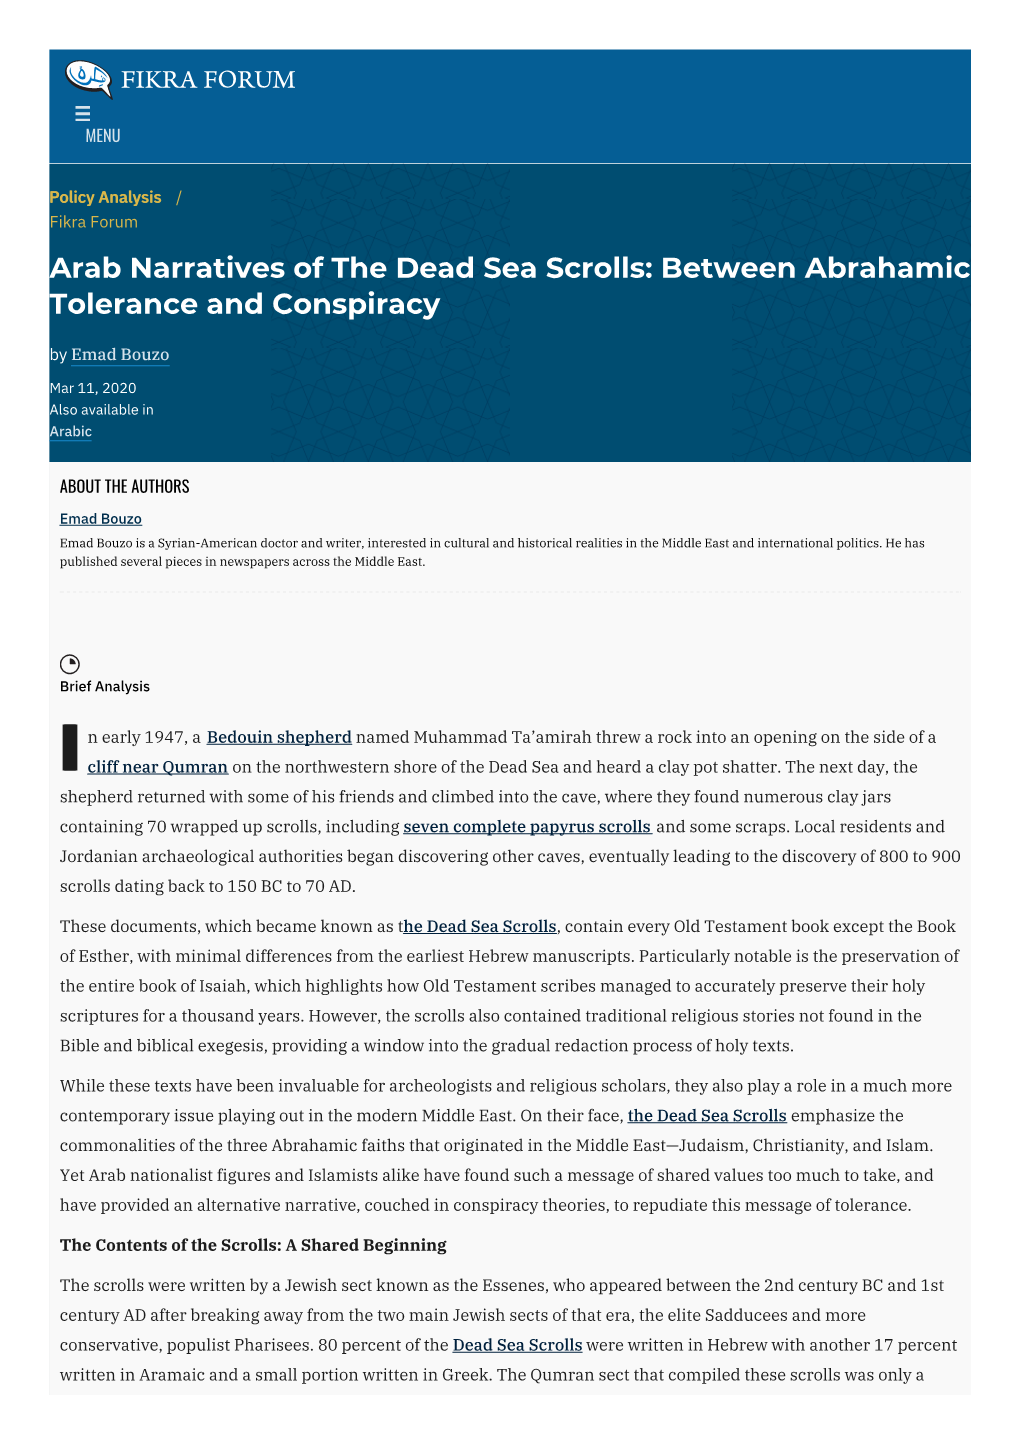 Arab Narratives of the Dead Sea Scrolls: Between Abrahamic Tolerance and Conspiracy by Emad Bouzo